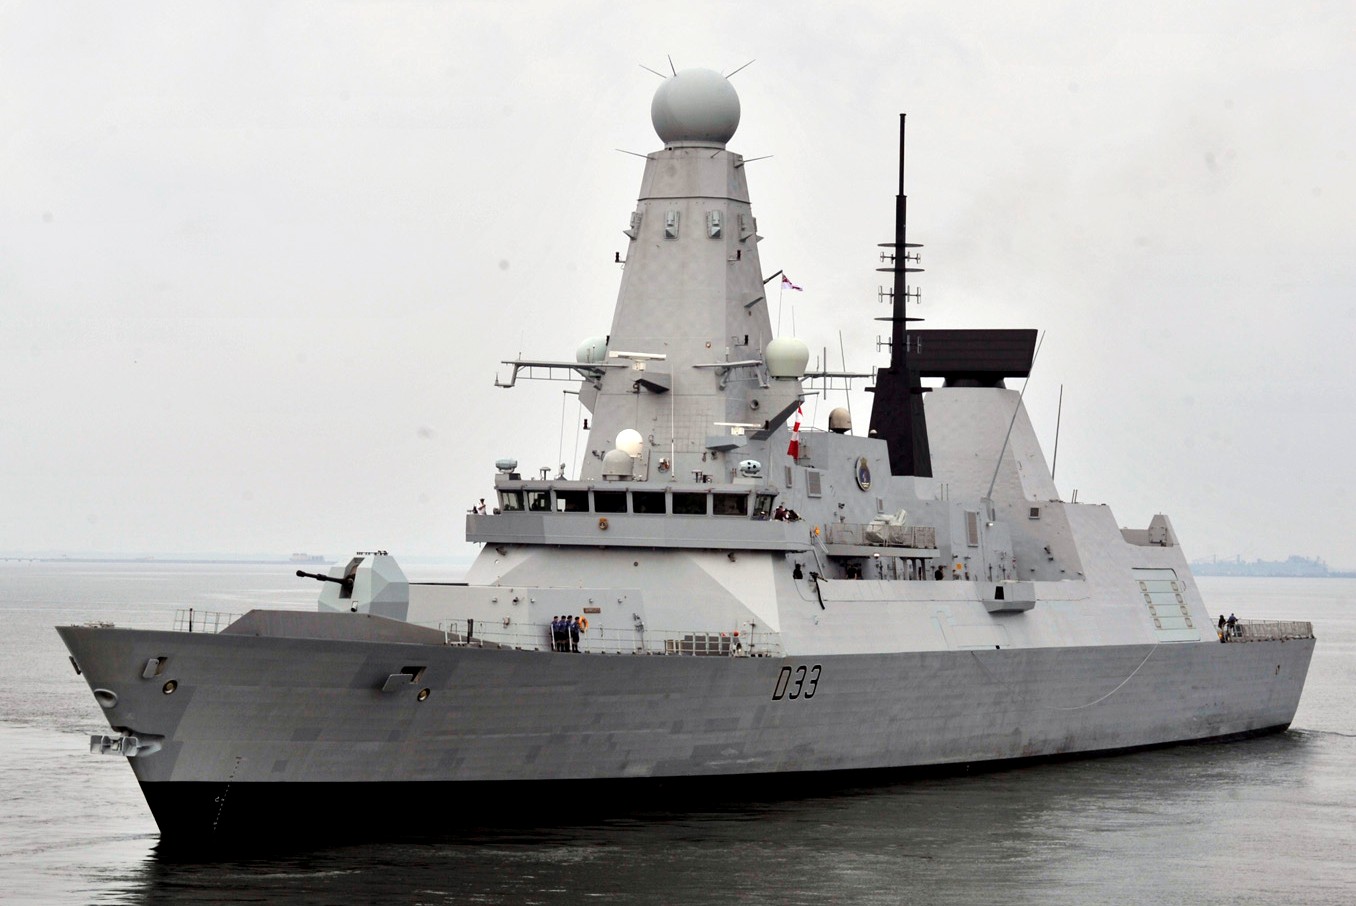 hms dauntless d-33 type 45 daring class guided missile destroyer royal navy sea viper paams 08